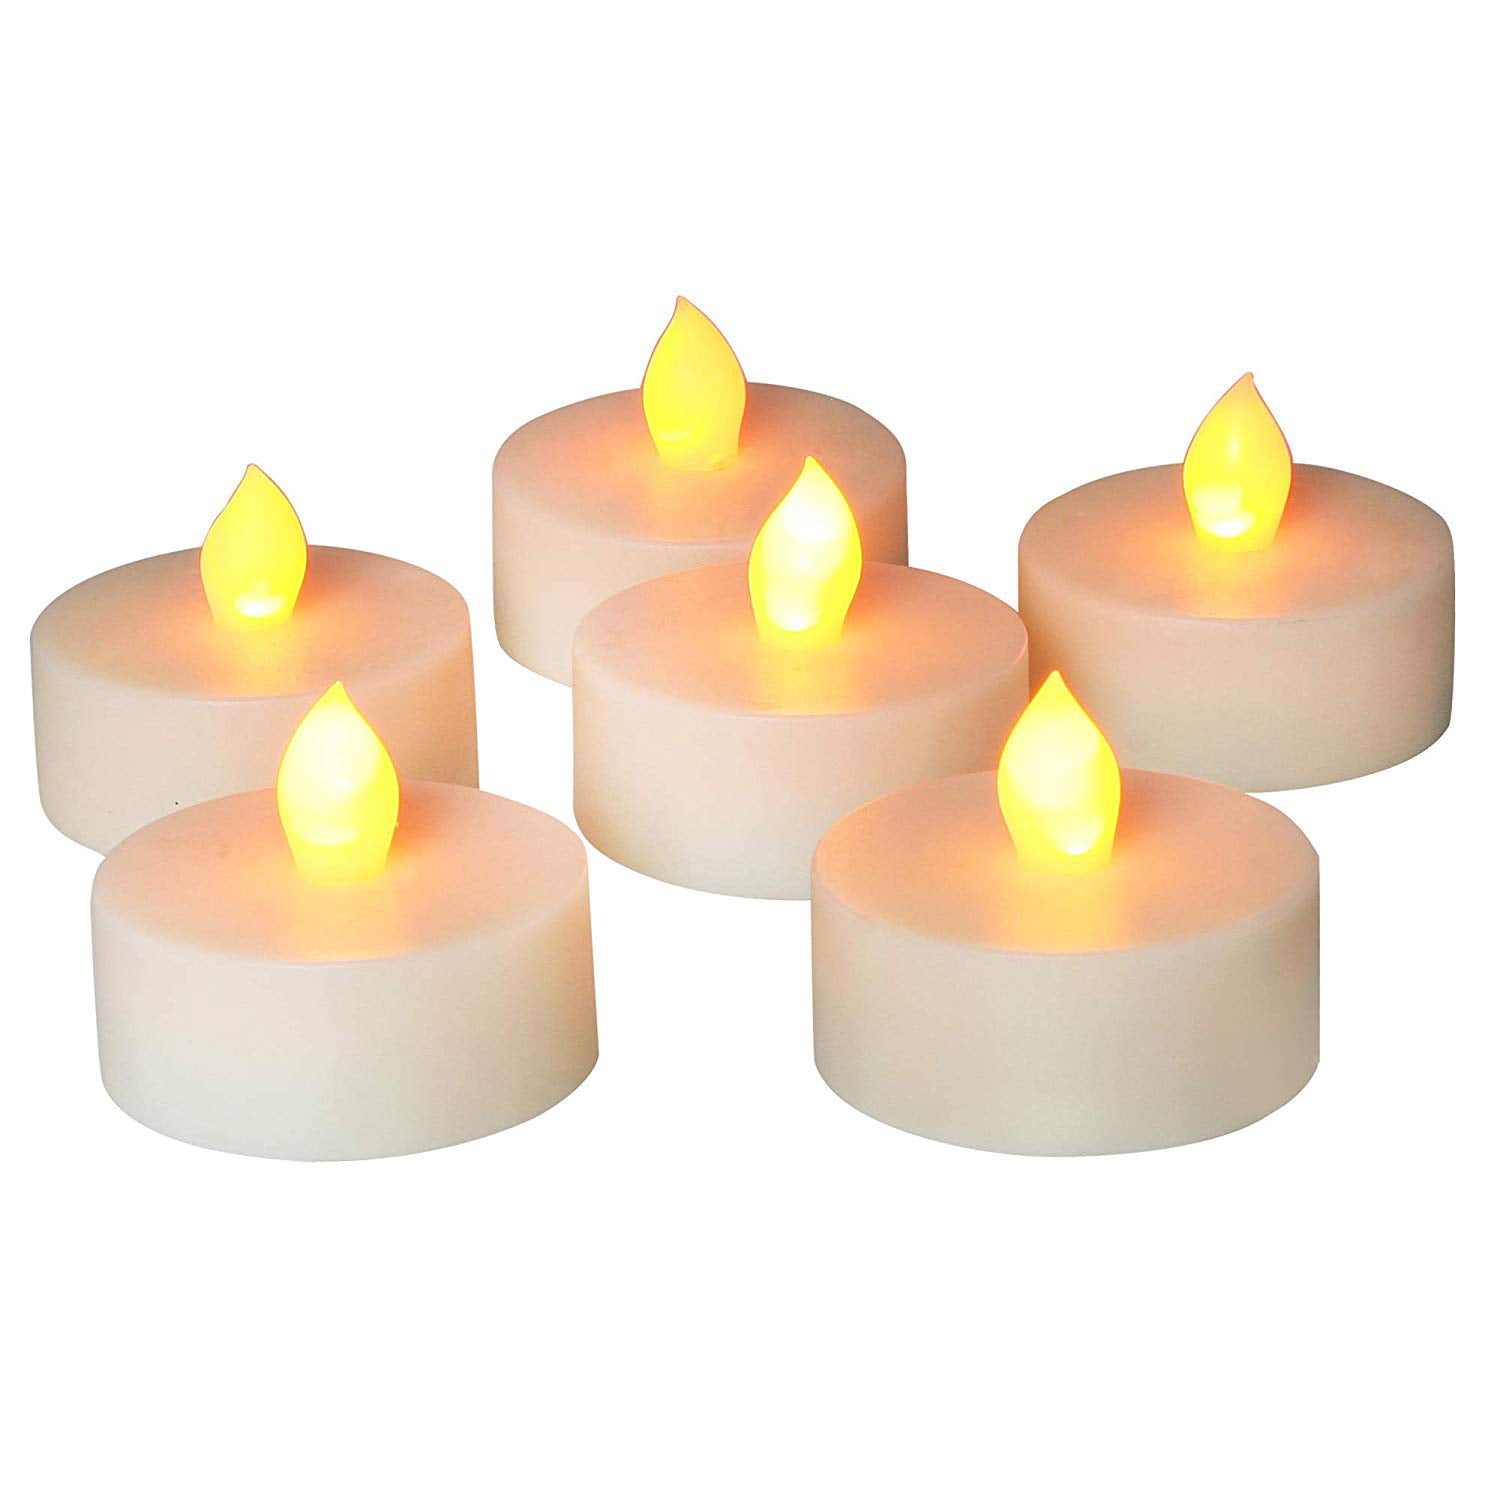 Flameless Flickering LED Tea Lights Home Decoration Electric Candles W/ Timer 